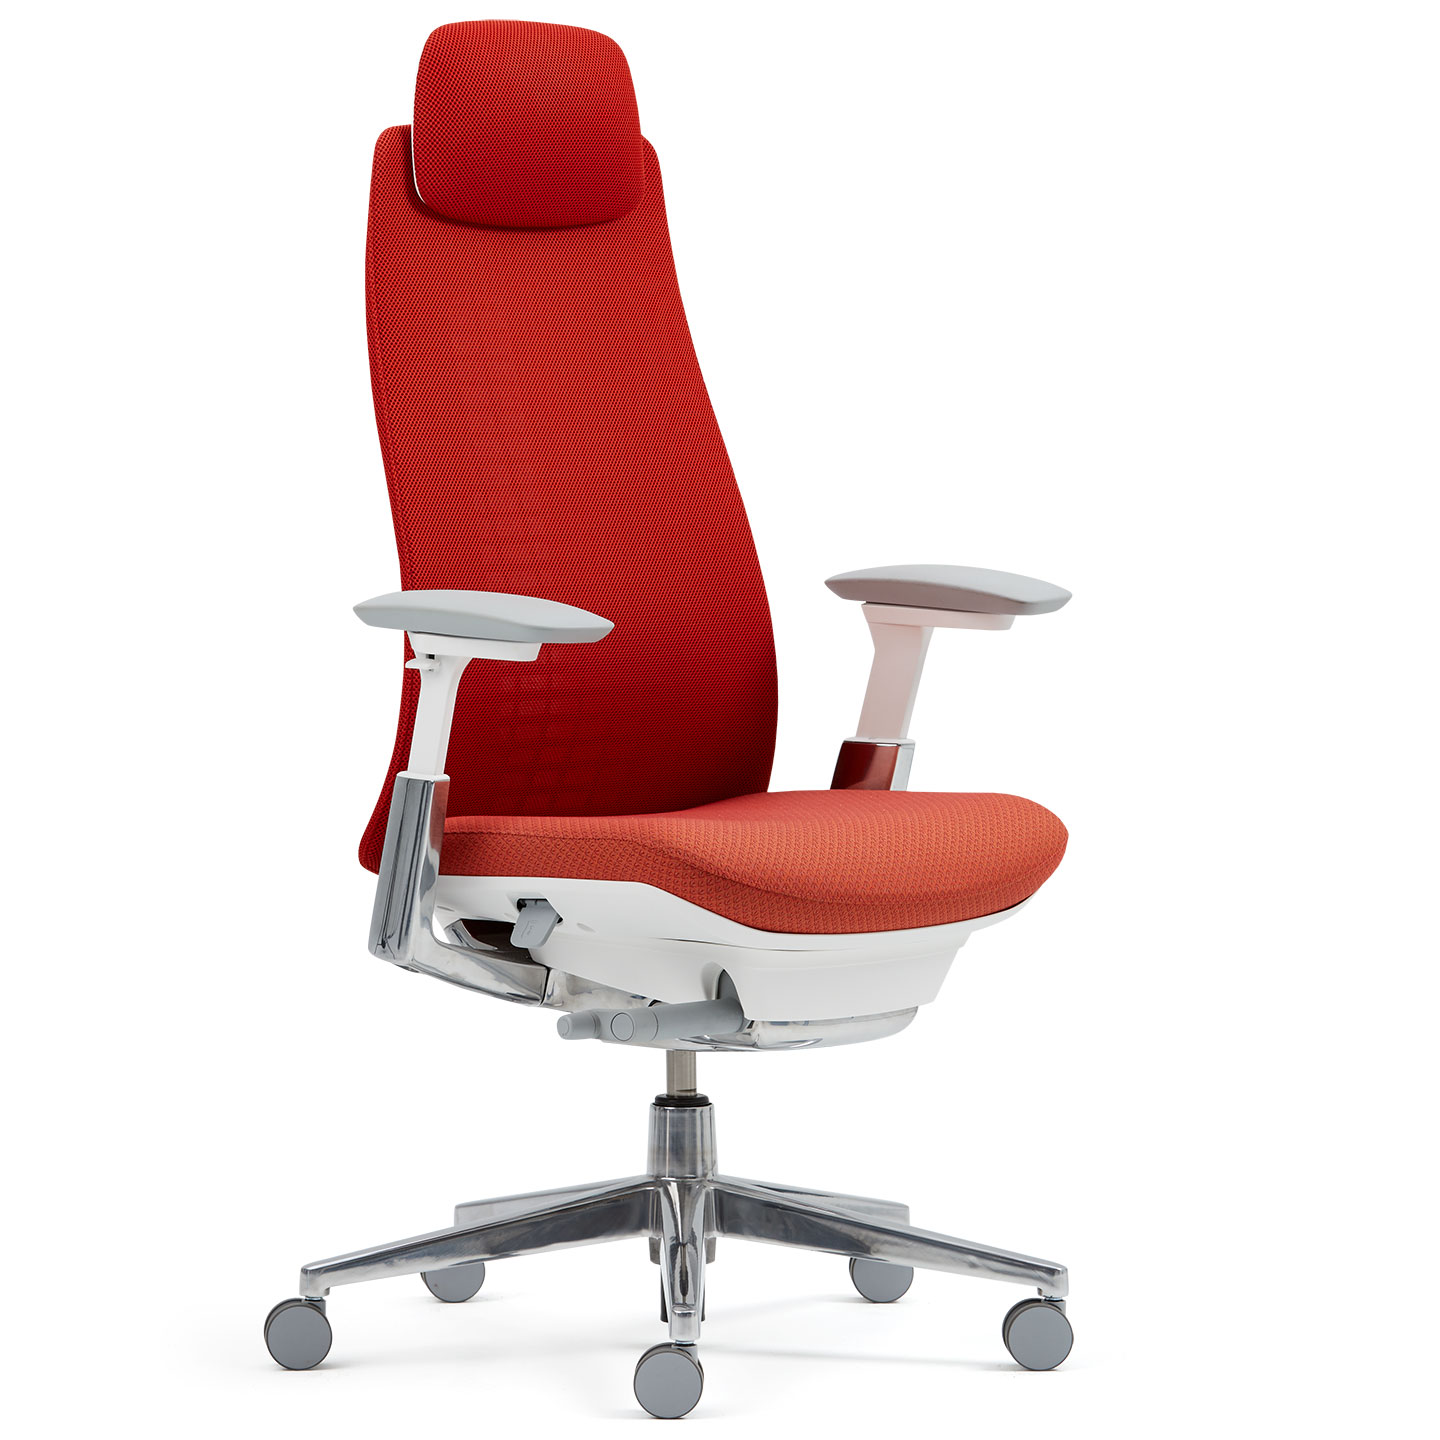 Haworth Fern Executive Task chair in red upholstery seen from a side angle